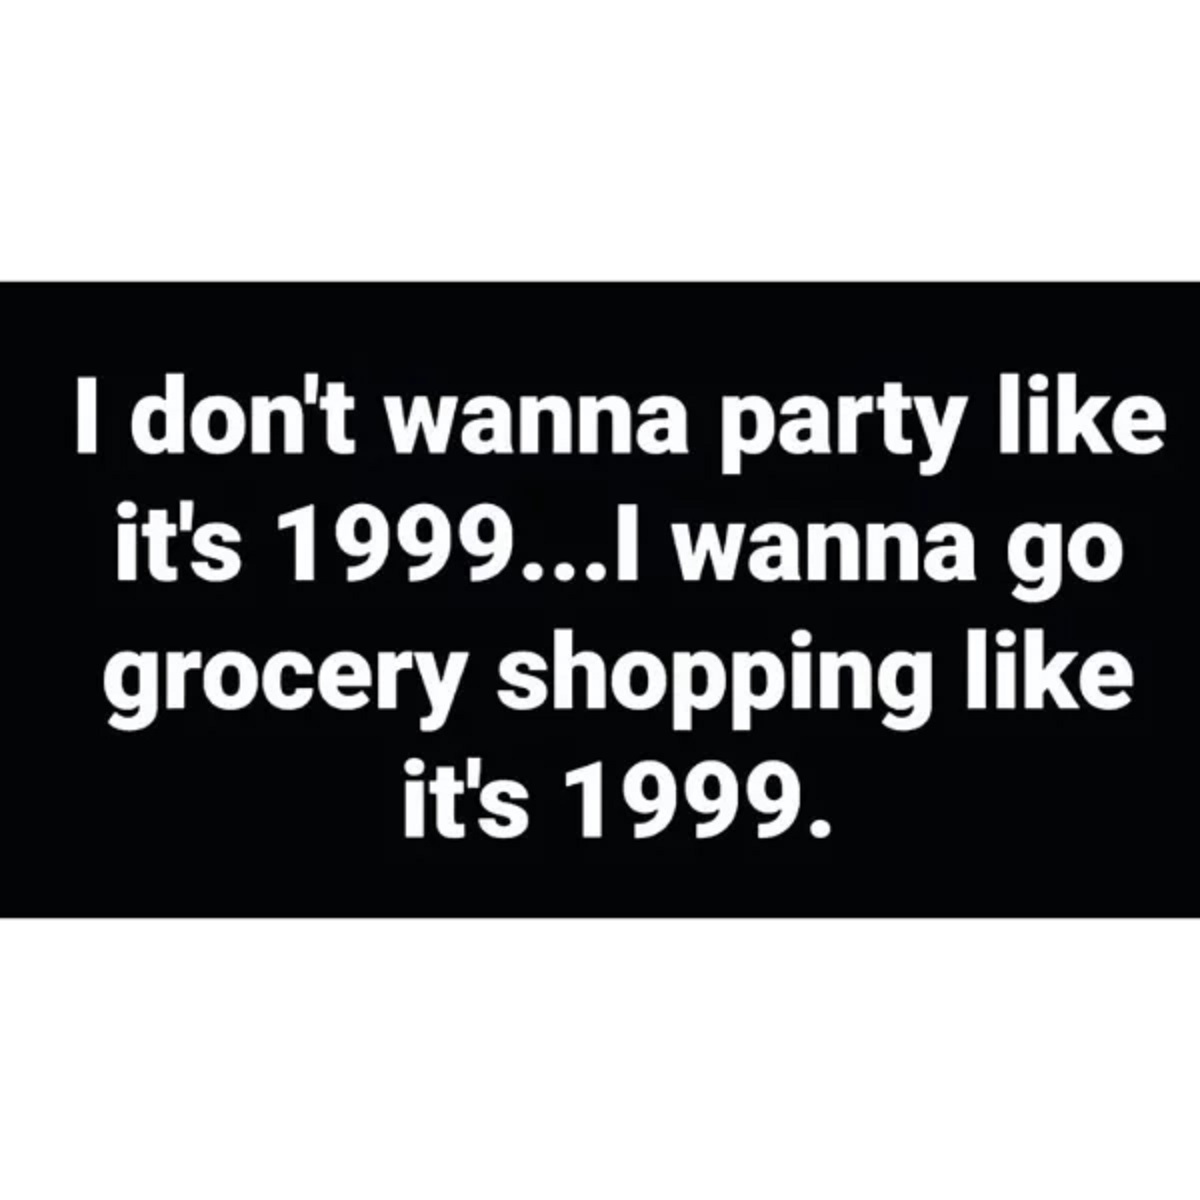 I don't wanna party it's 1999...I wanna go grocery shopping it's 1999.